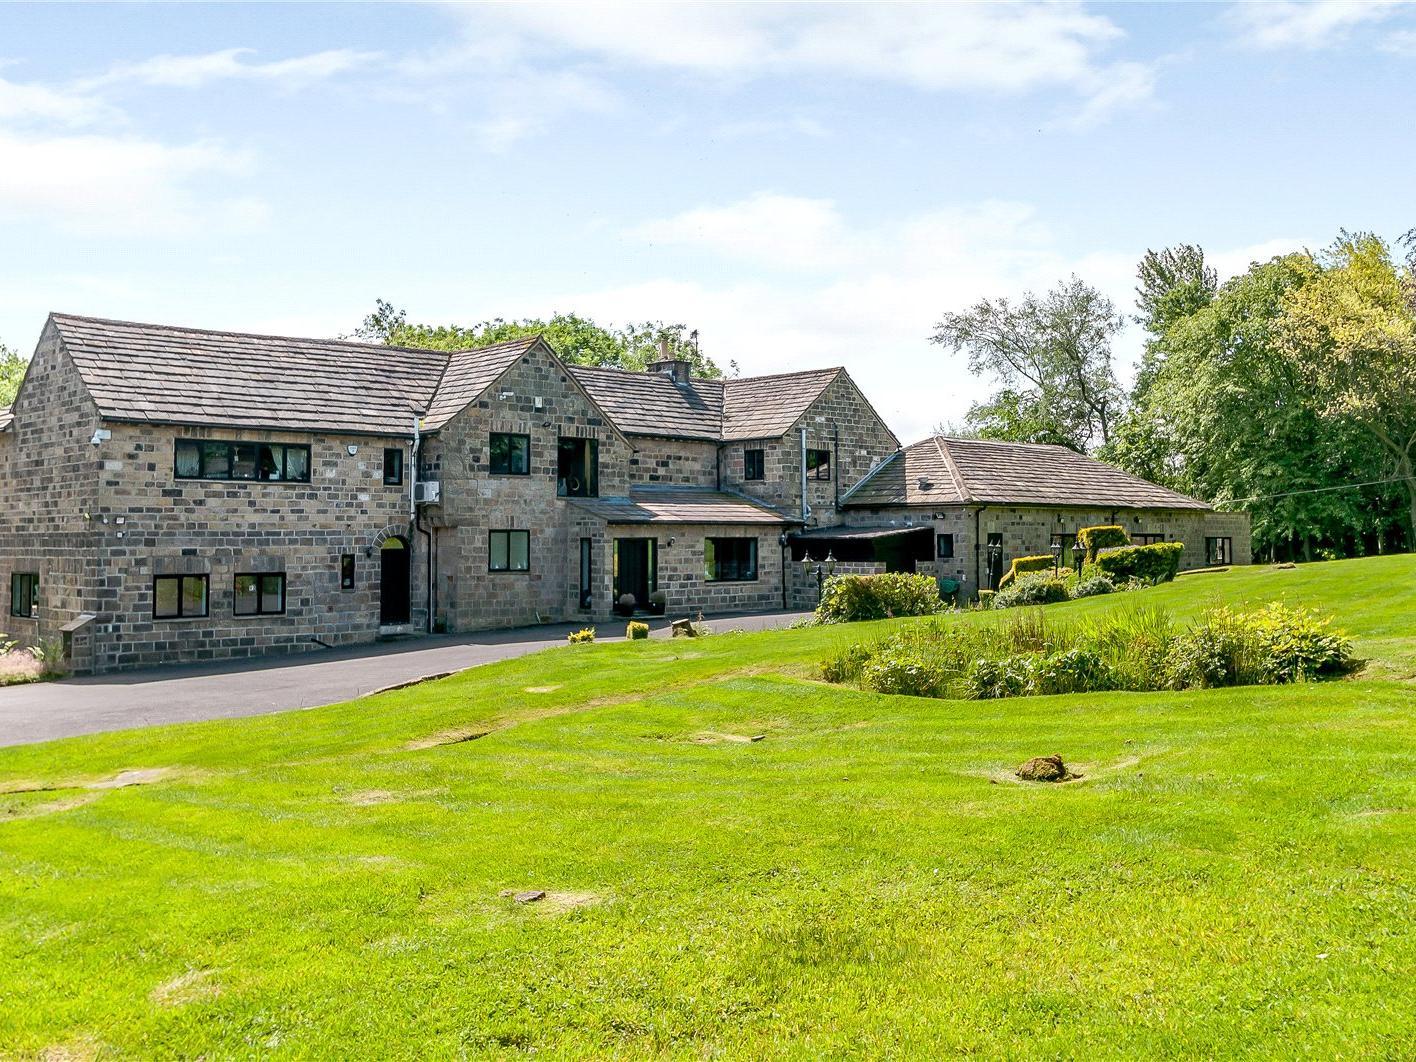 This property, named Moor Grange, is set in an elevated position along Scotland Lane, situated in grounds of approximately two and a half acres